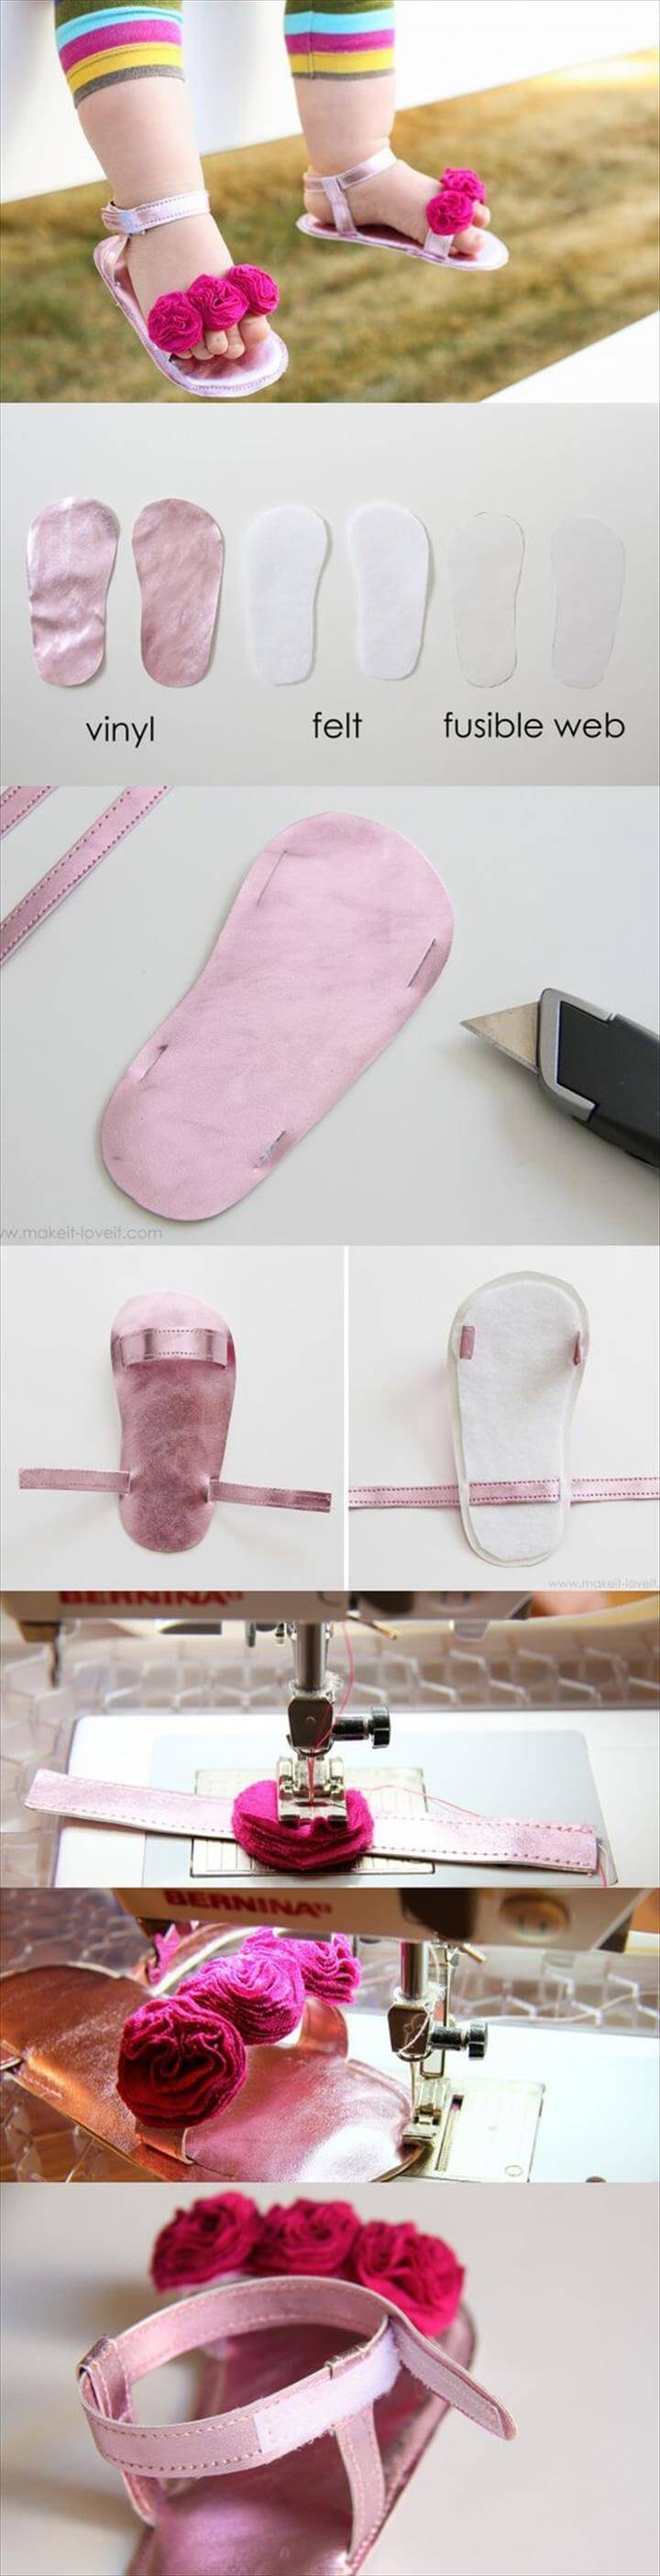 DIY free baby shoes project